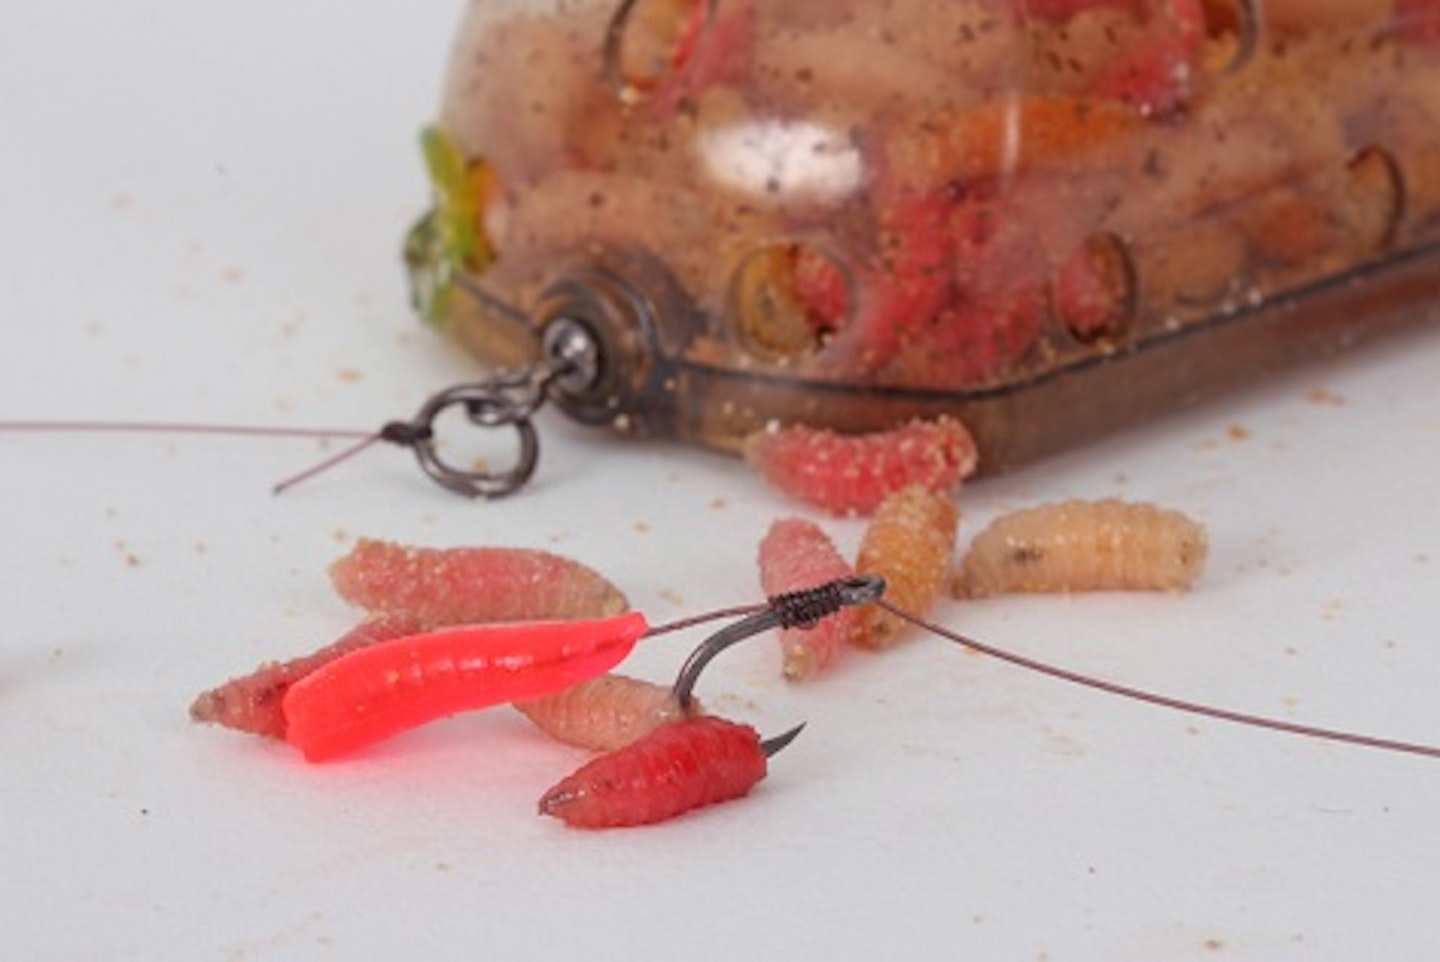 HOW TO USE MAGGOTS TO CATCH BIG FISH